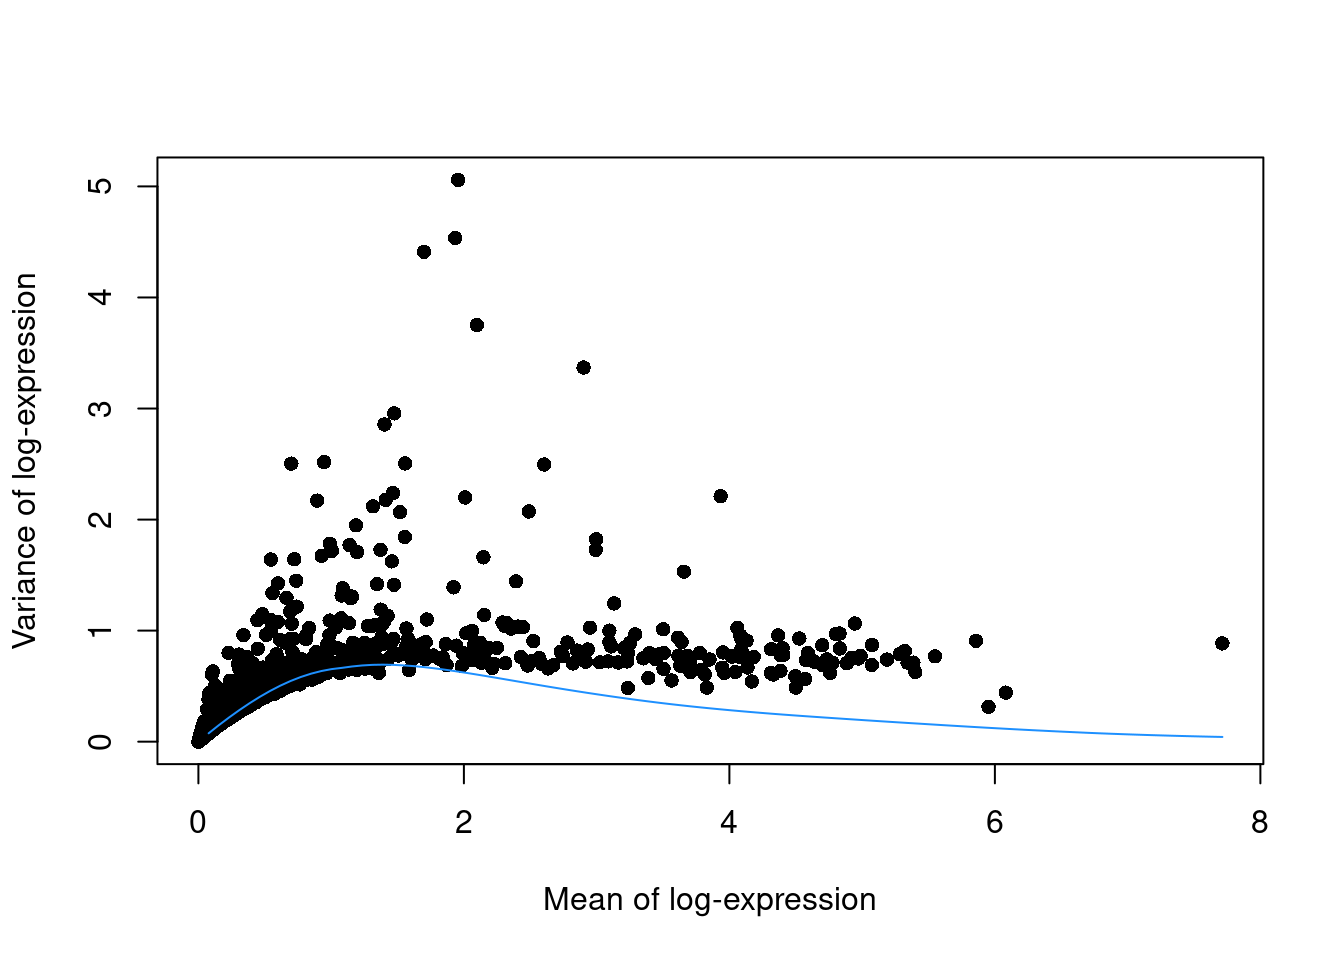 Variance of normalized log-expression values for each gene in the PBMC dataset, plotted against the mean log-expression. The blue line represents represents the mean-variance relationship corresponding to Poisson noise.